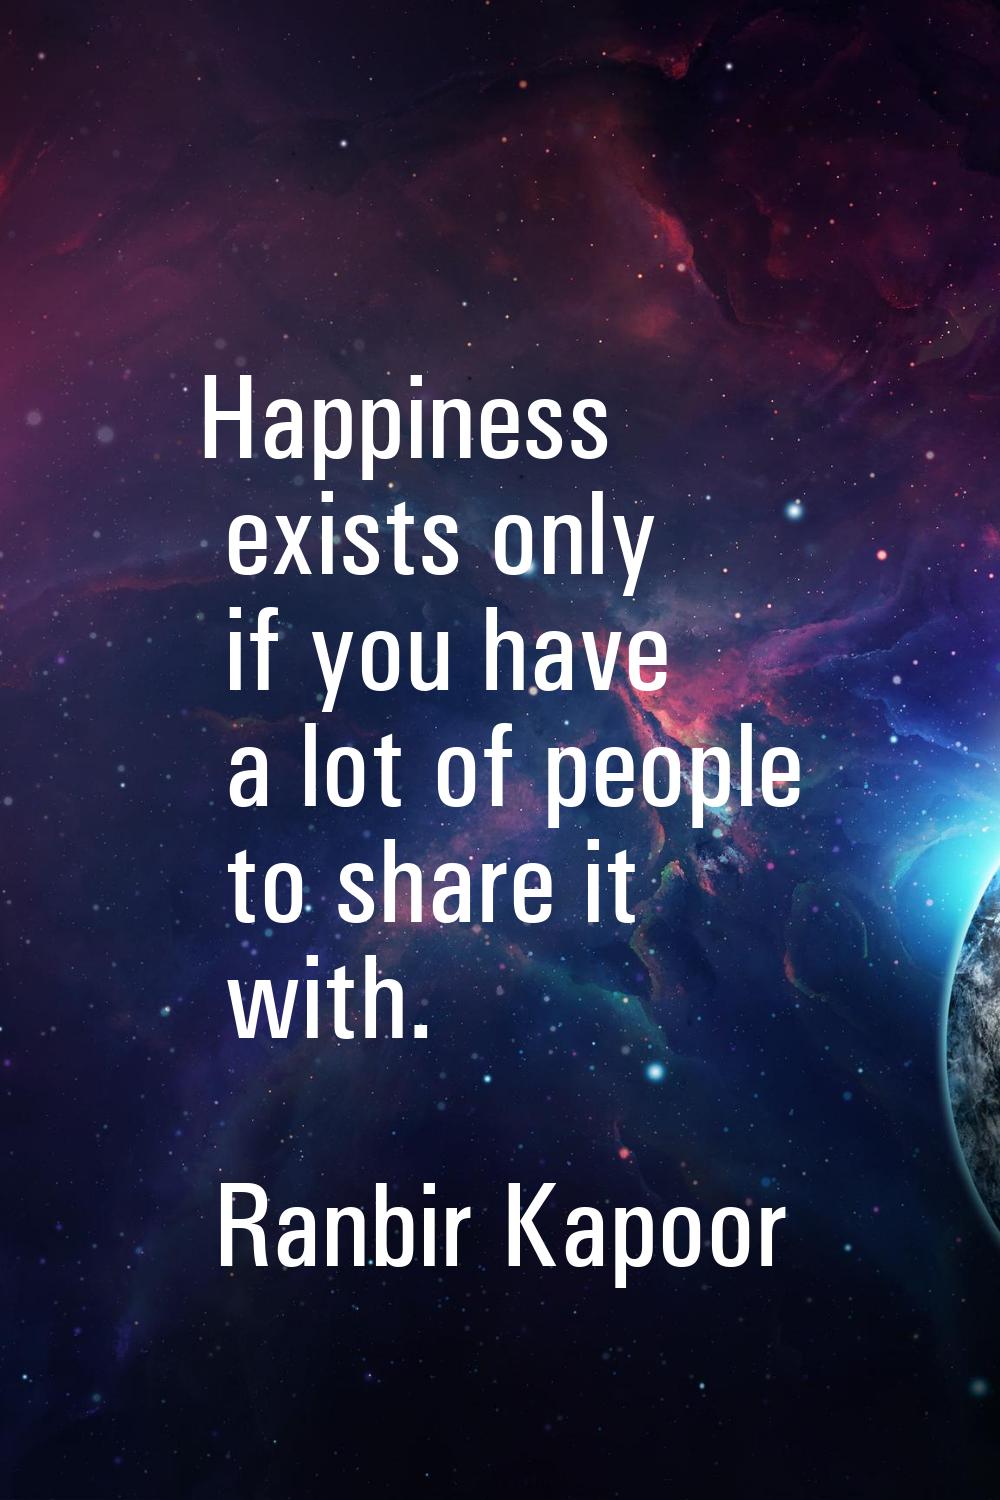 Happiness exists only if you have a lot of people to share it with.